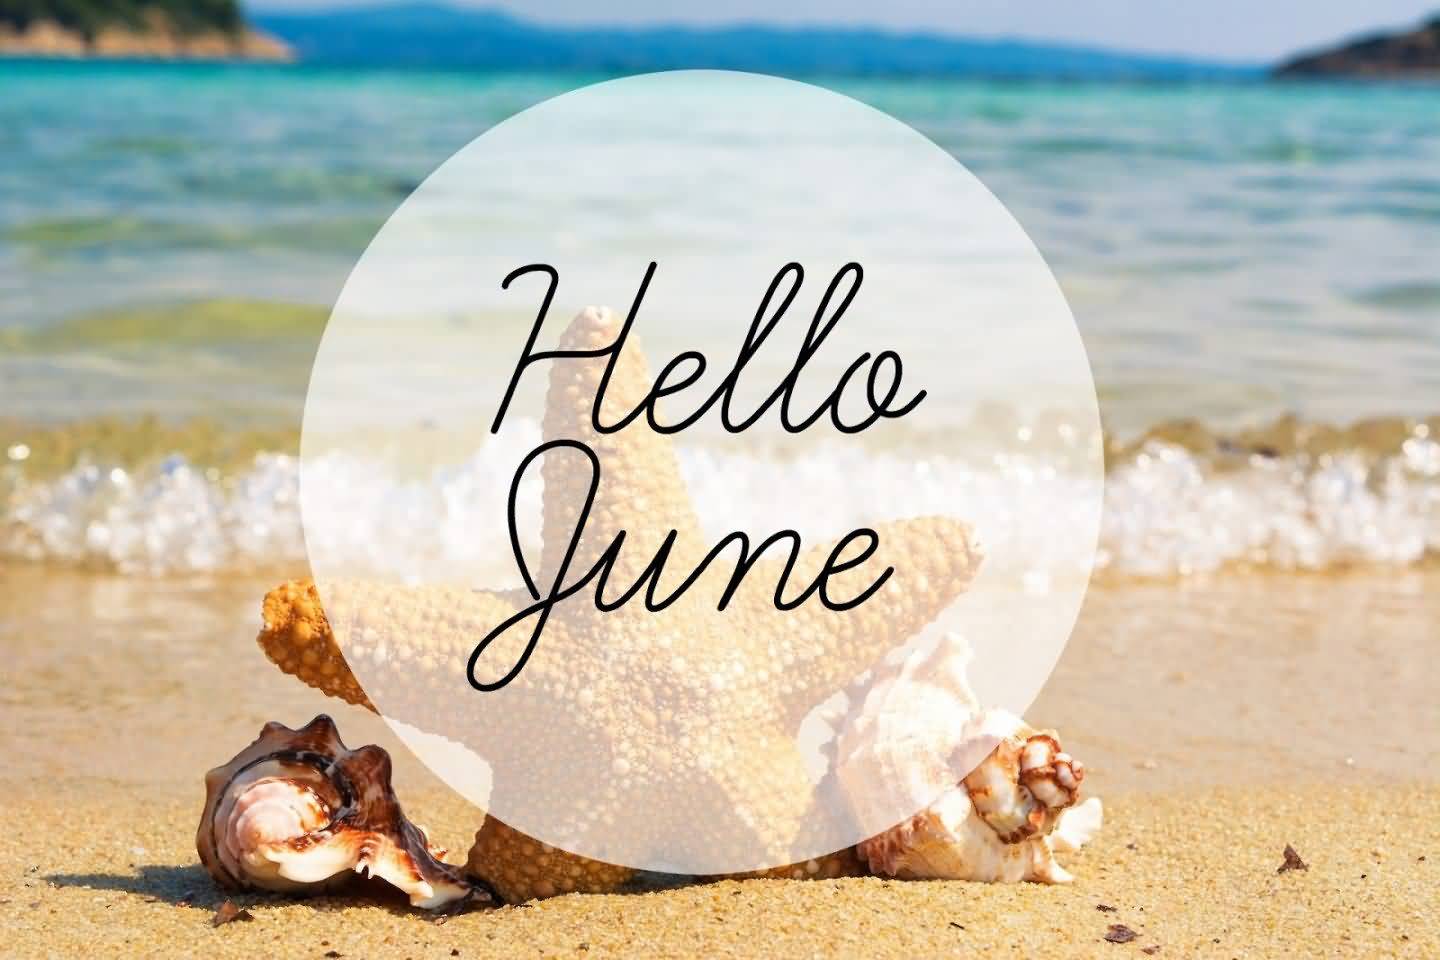 50+ Best Hello June Images, Quotes and Wishes - Picss Mine